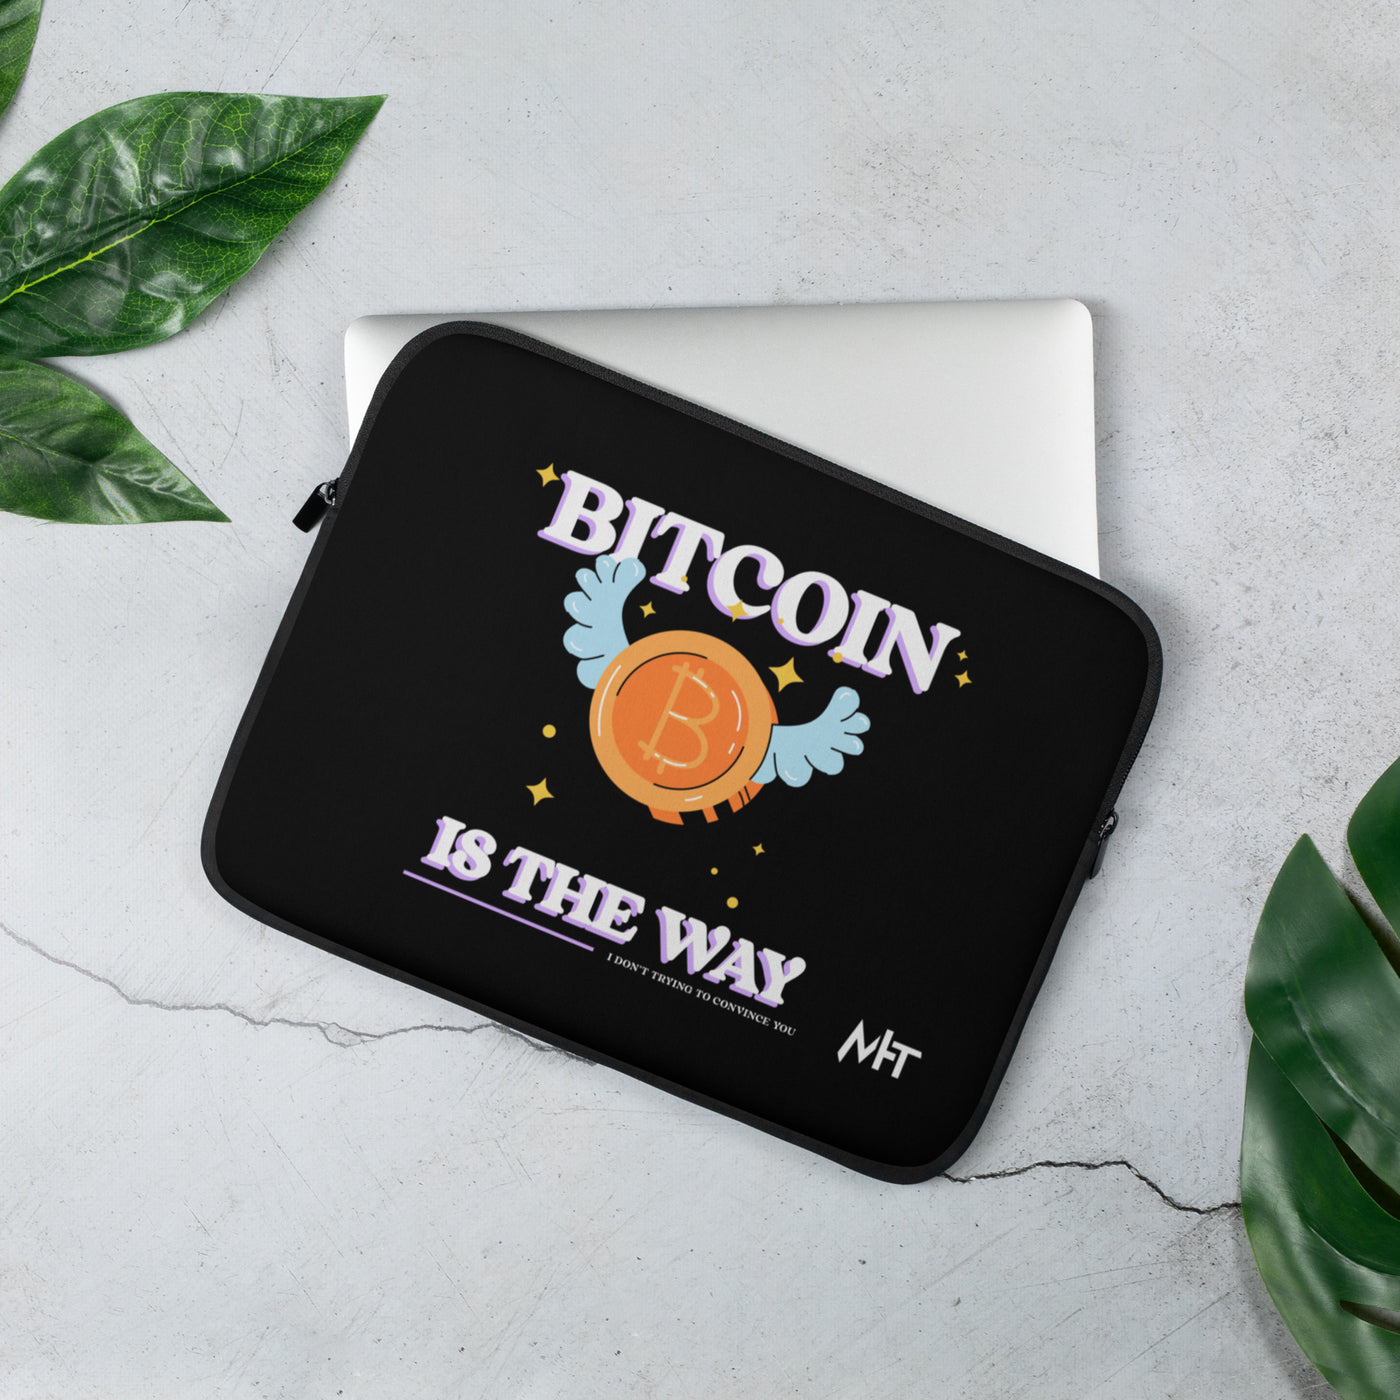 Bitcoin is the way - Laptop Sleeve